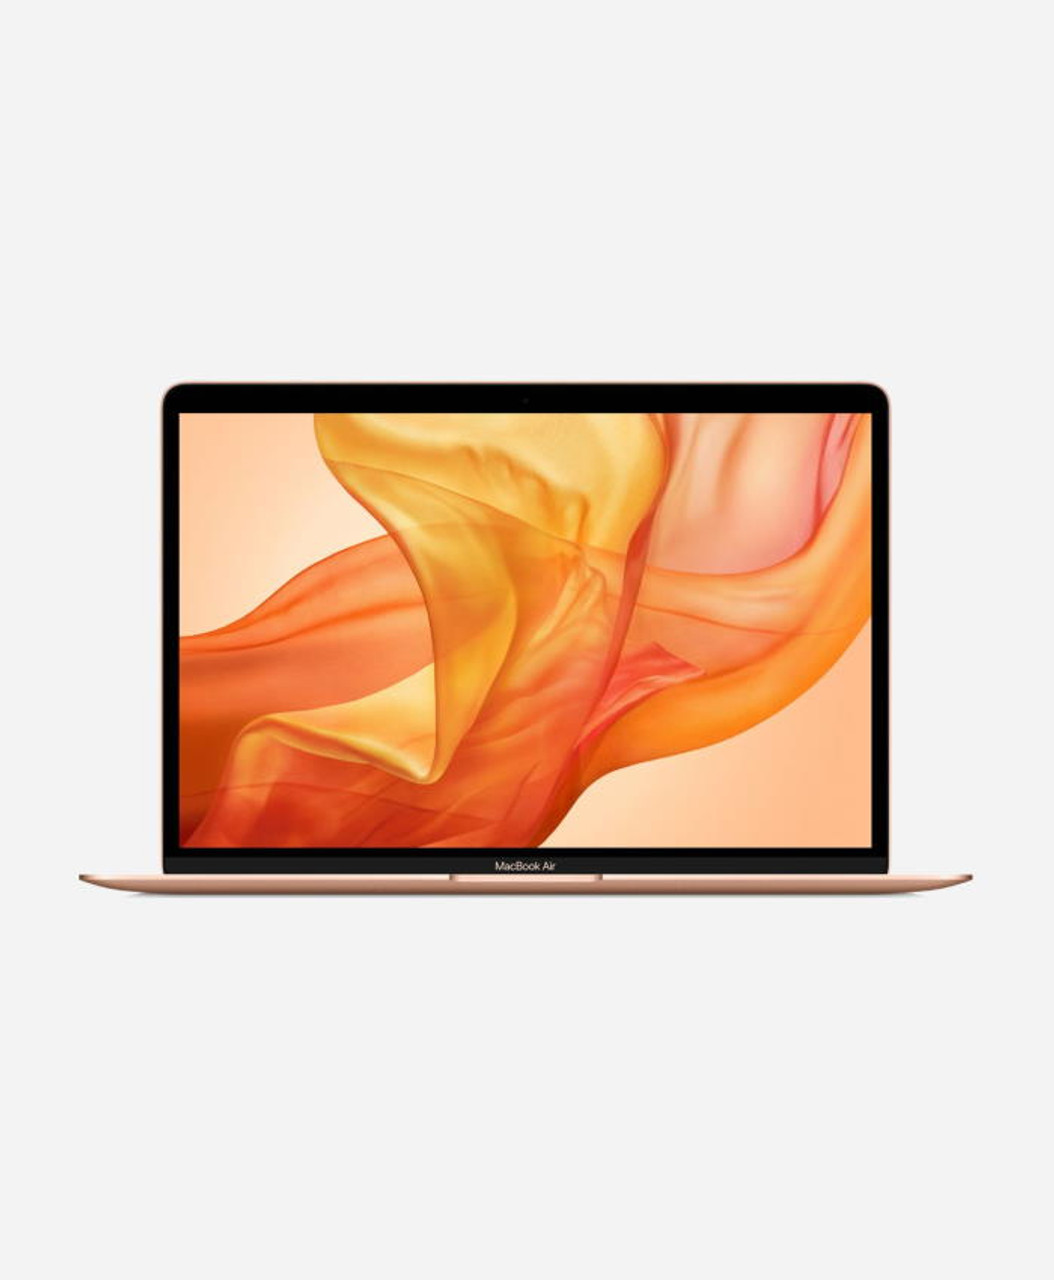 Used Apple Macbook Air 13.3-inch (Retina, Gold) 1.6GHZ Dual Core 